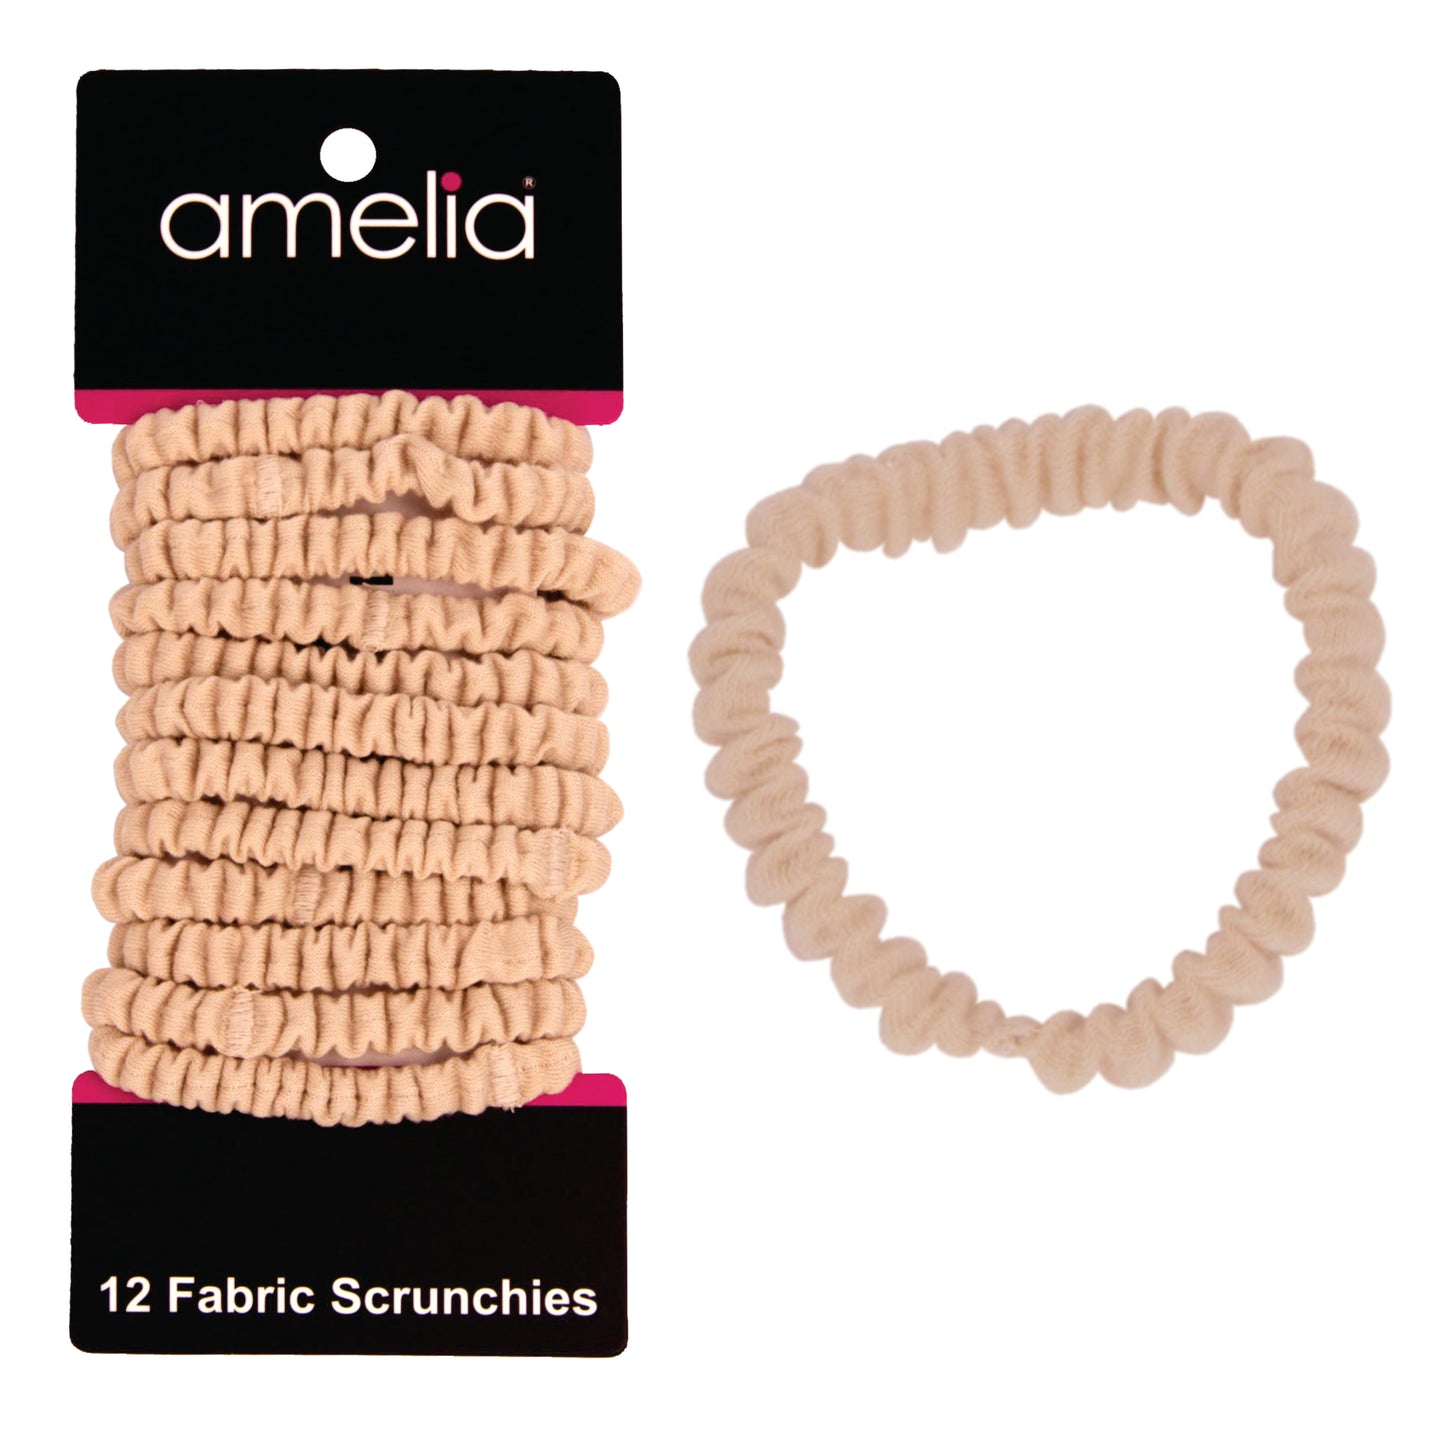 Amelia Beauty, Tan Skinny Jersey Scrunchies, 2.125in Diameter, Gentle on Hair, Strong Hold, No Snag, No Dents or Creases. 12 Pack